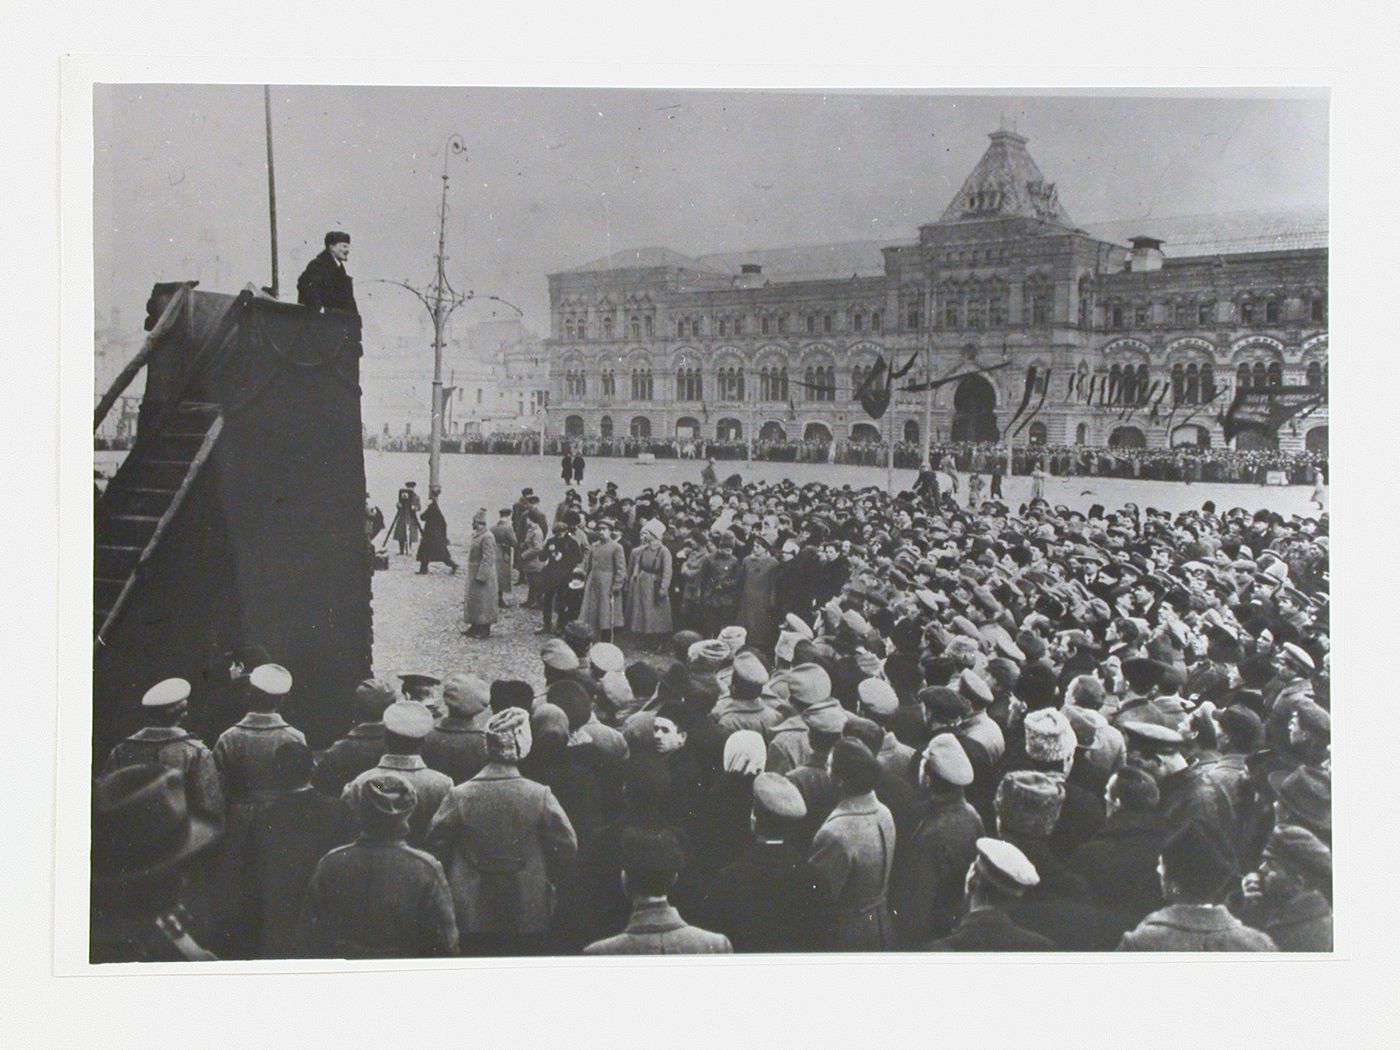 View of a meeting in Red Square showing Lenin addressing a group of soldiers from a podium with the Upper Shopping Arcades in the background, Moscow